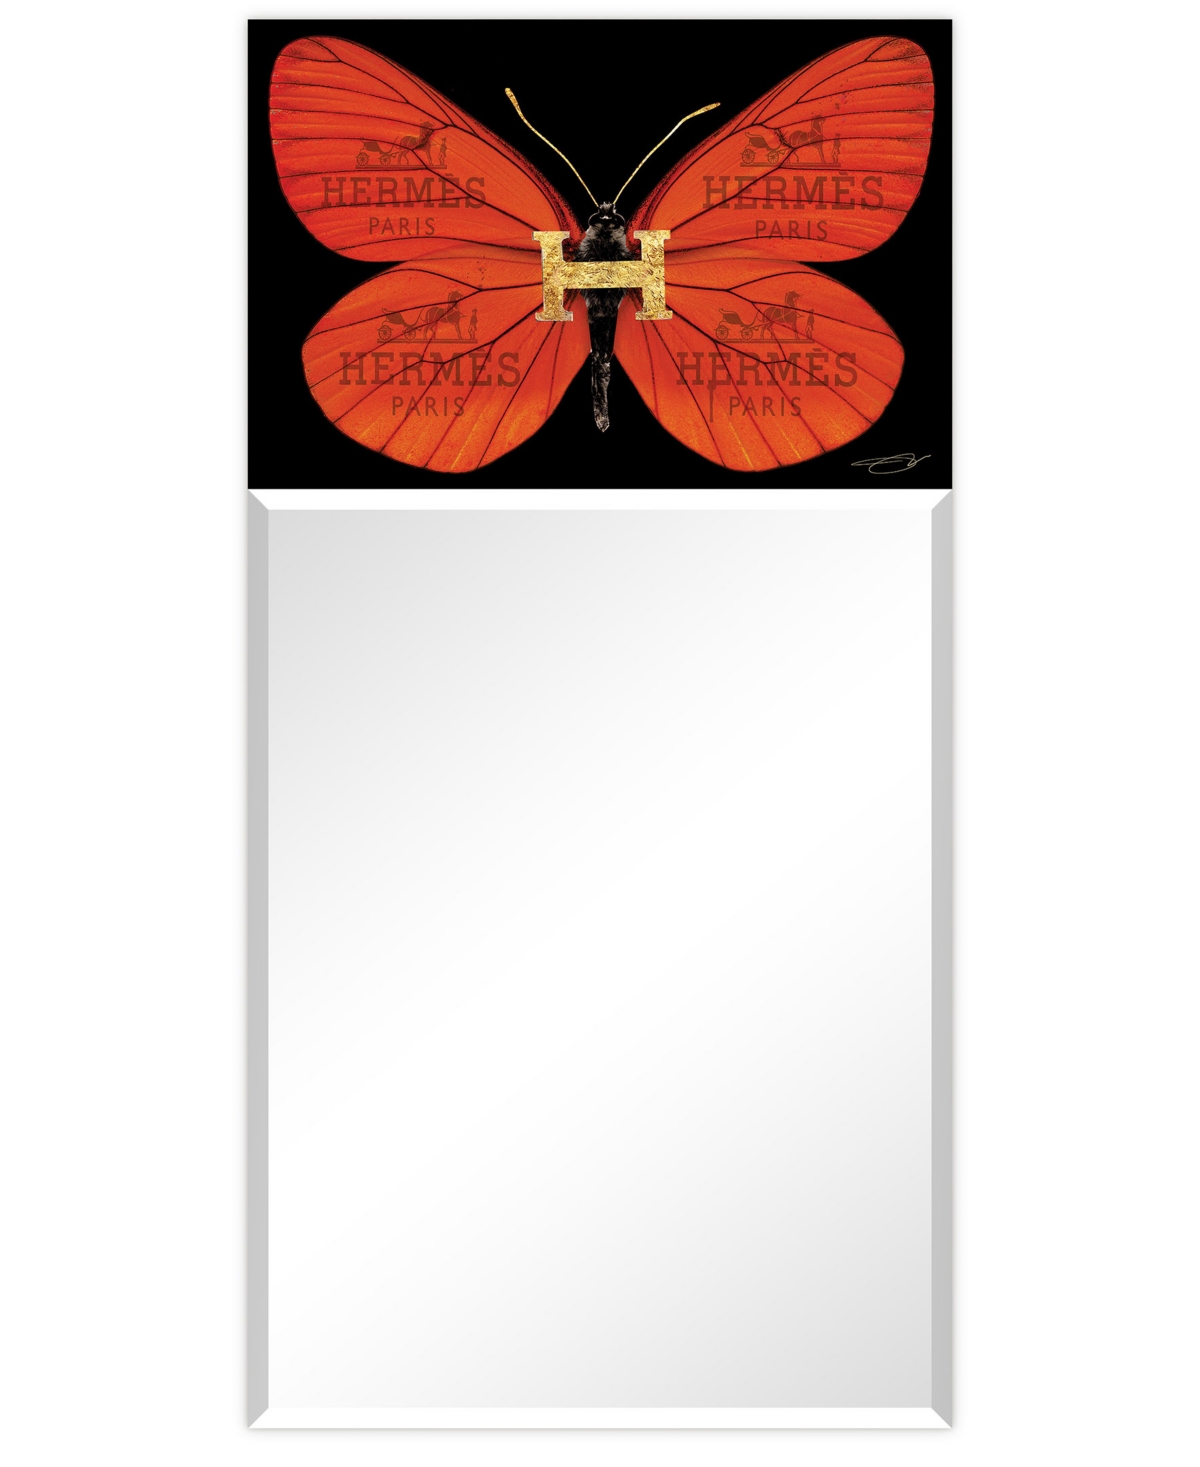 Empire Art Direct Designer Butterfly Rectangular Beveled Mirror On Free Floating Printed Tempered Art Glass In Black,red